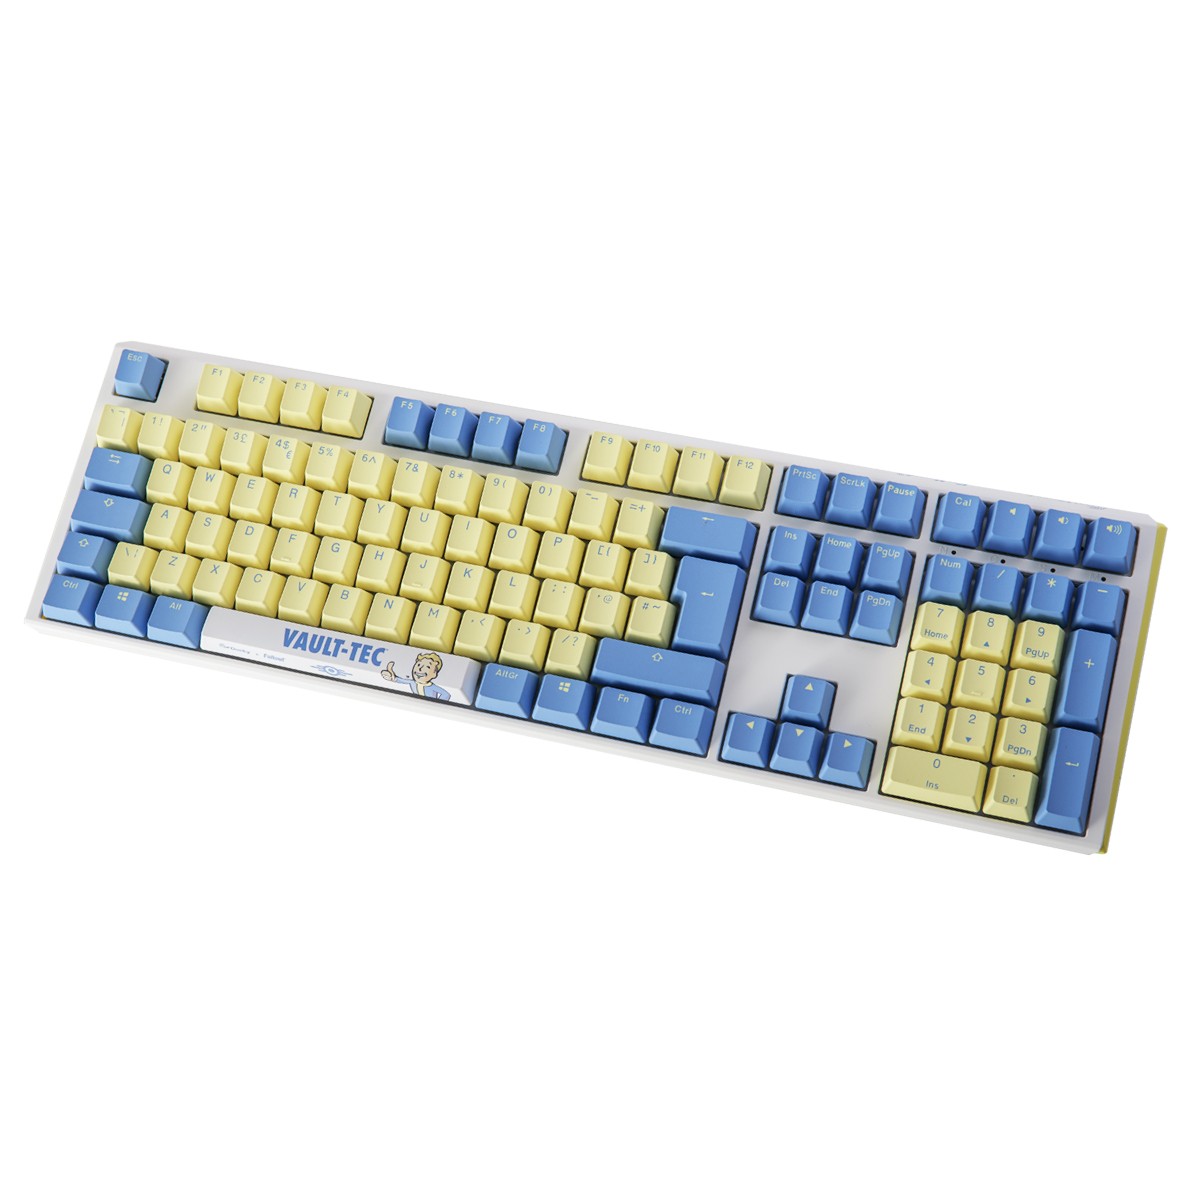 B Grade Ducky x Fallout One 3 RGB LE Cherry Red Switch Mechanical Gaming Keyboard UK Layout